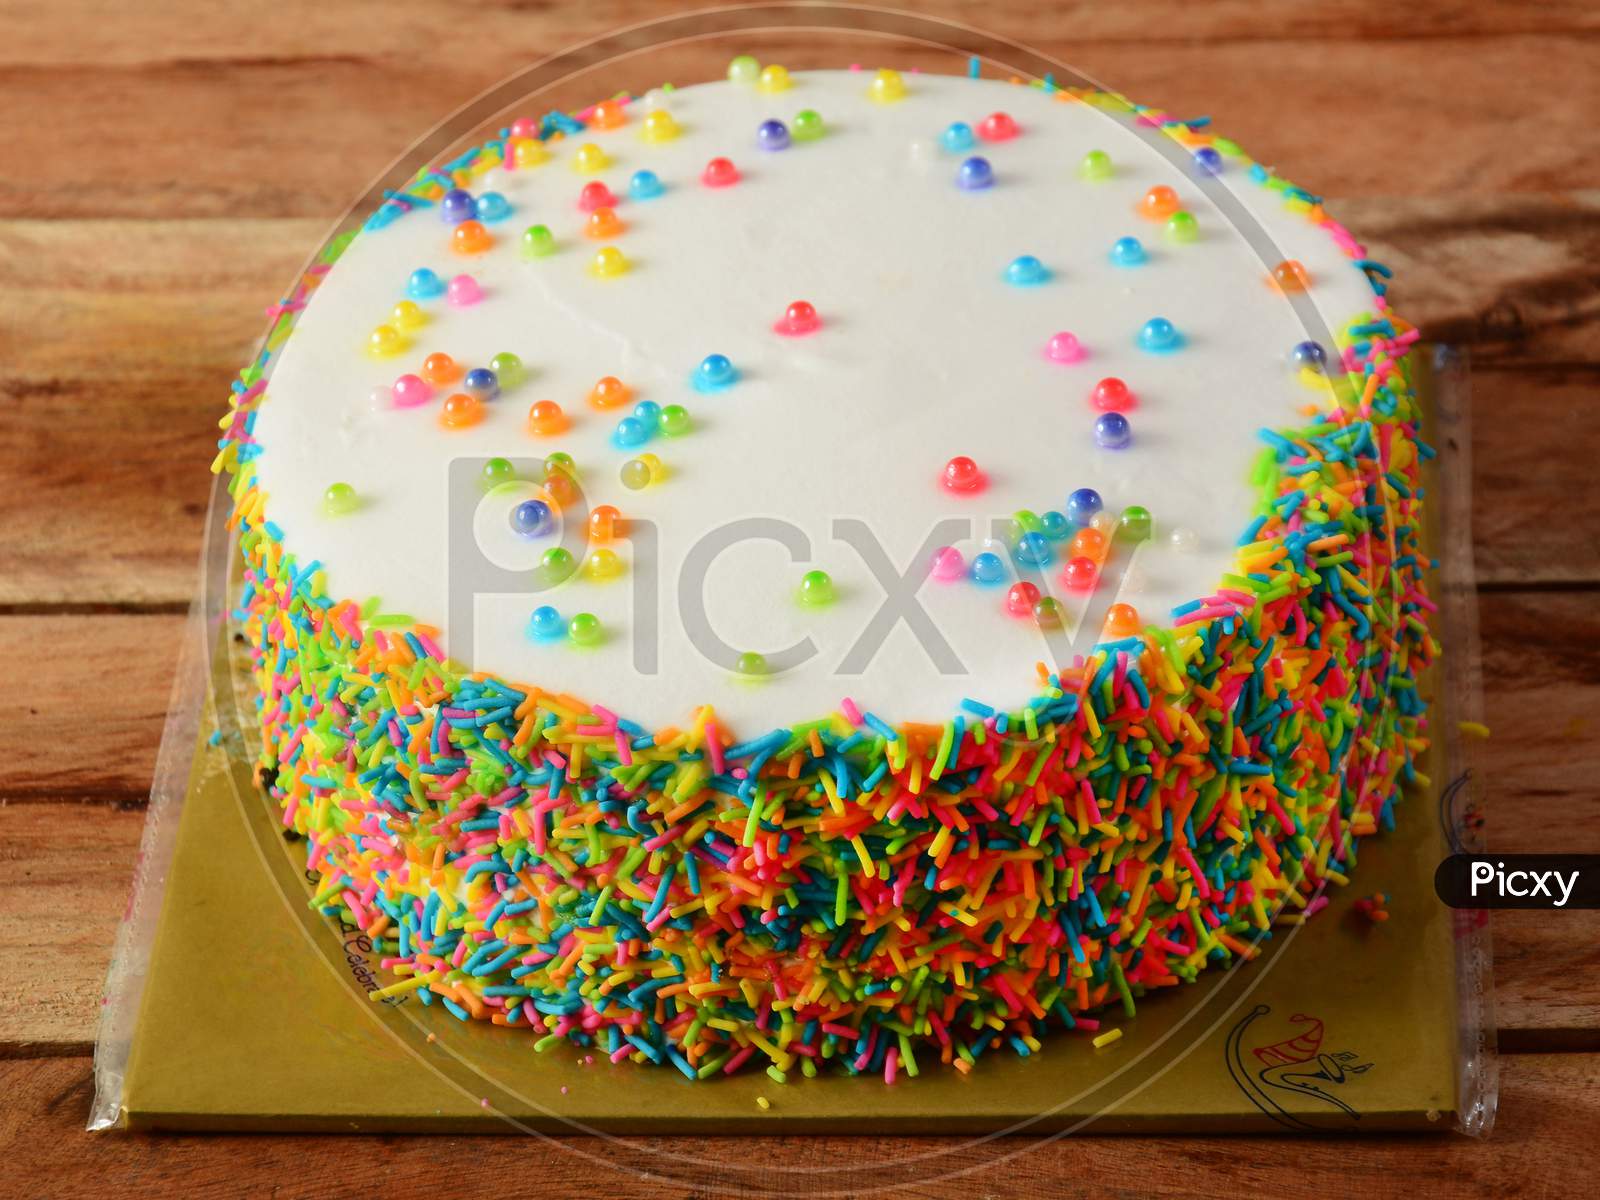 Freshly Made Rainbow Cream Cake On Wooden Table. Selective Focus